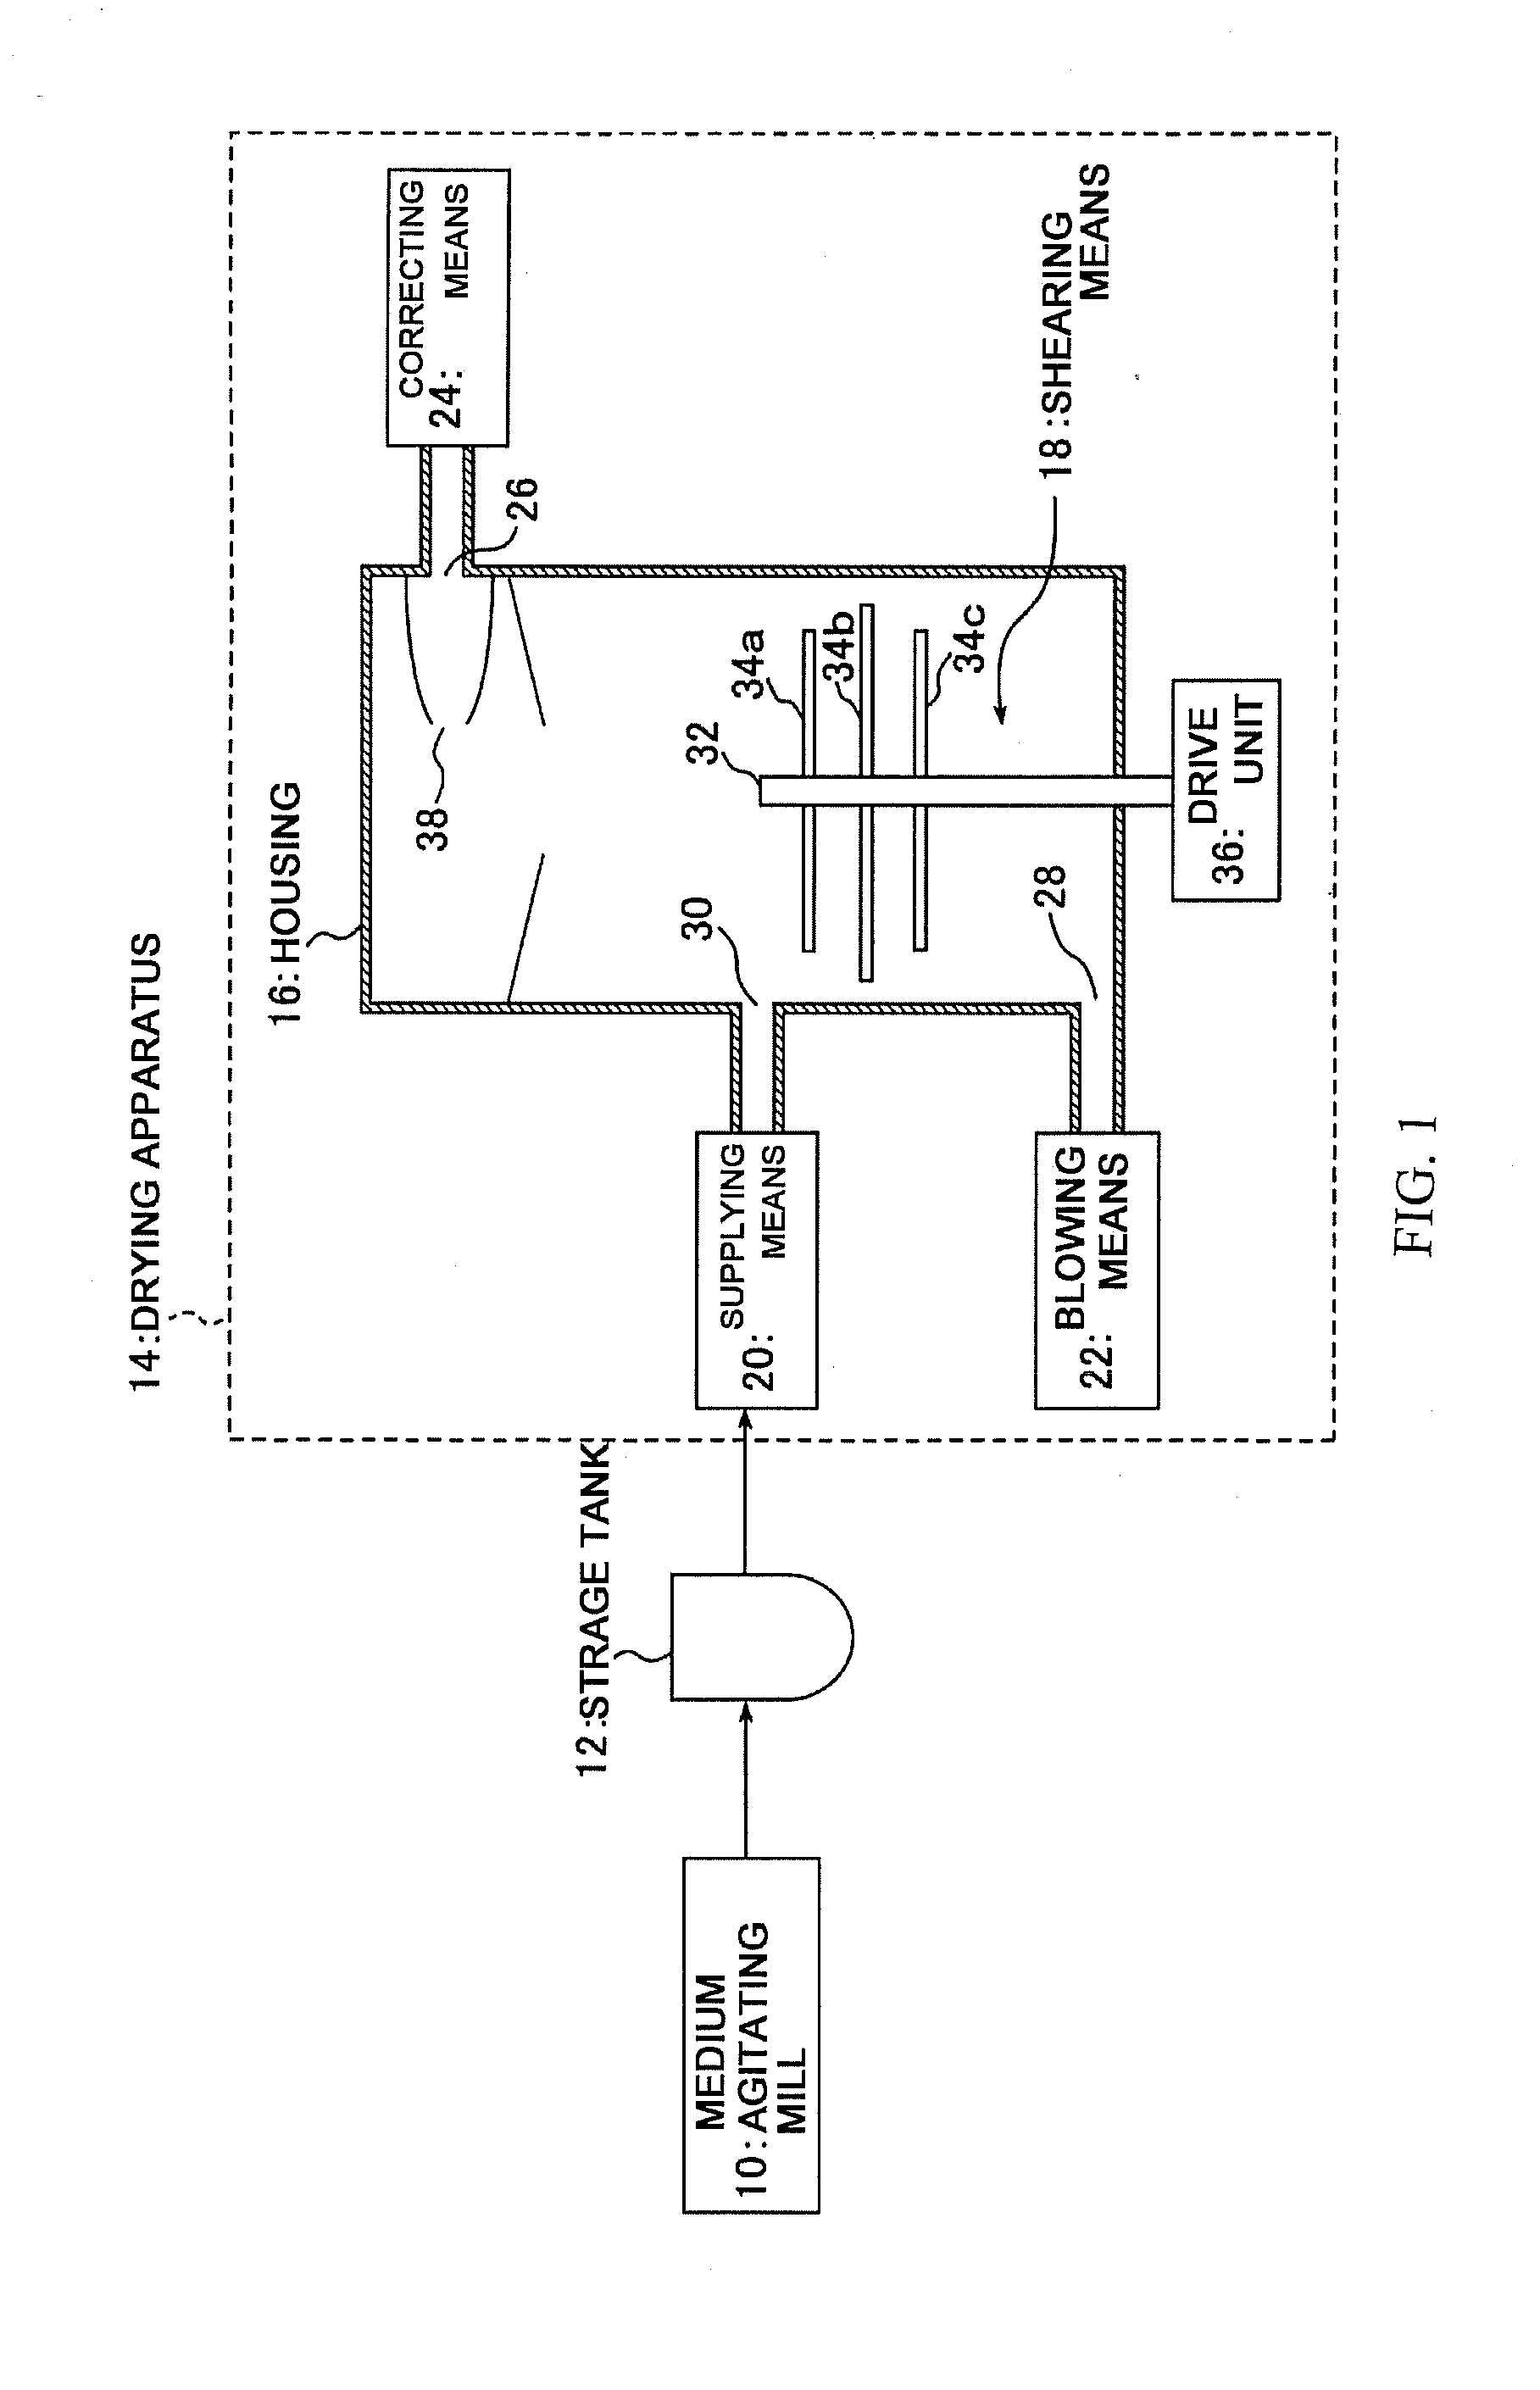 Process for producing powdery composition and powdery cosmetic